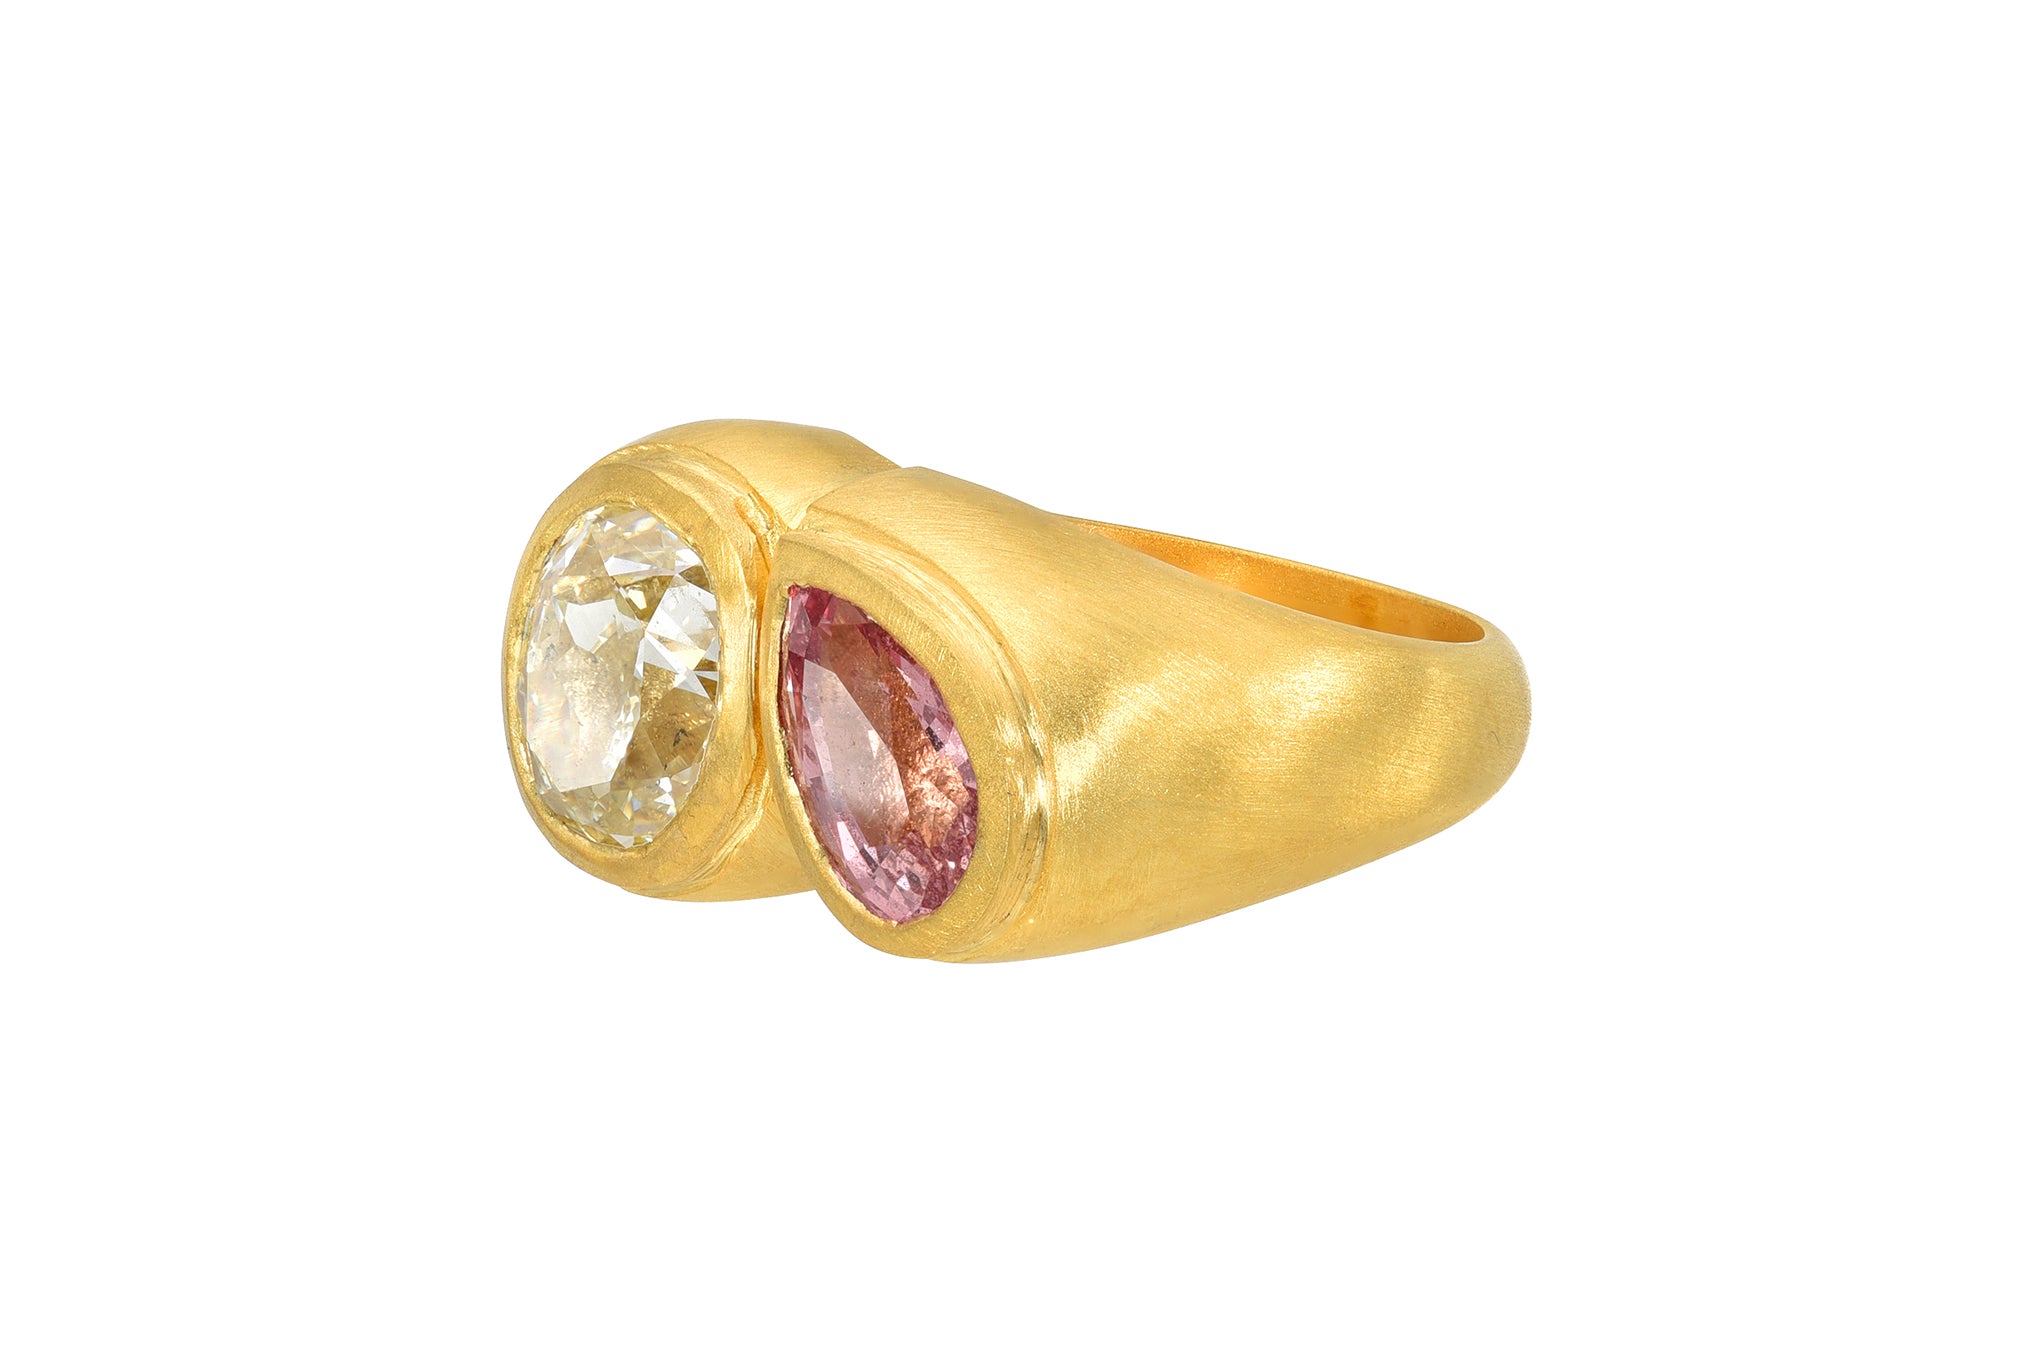 DARIUS JEWELS ONE OF A KIND DOUBLE PEAR PADPARADSCHA SAPPHIRE & OVAL DIAMOND RING